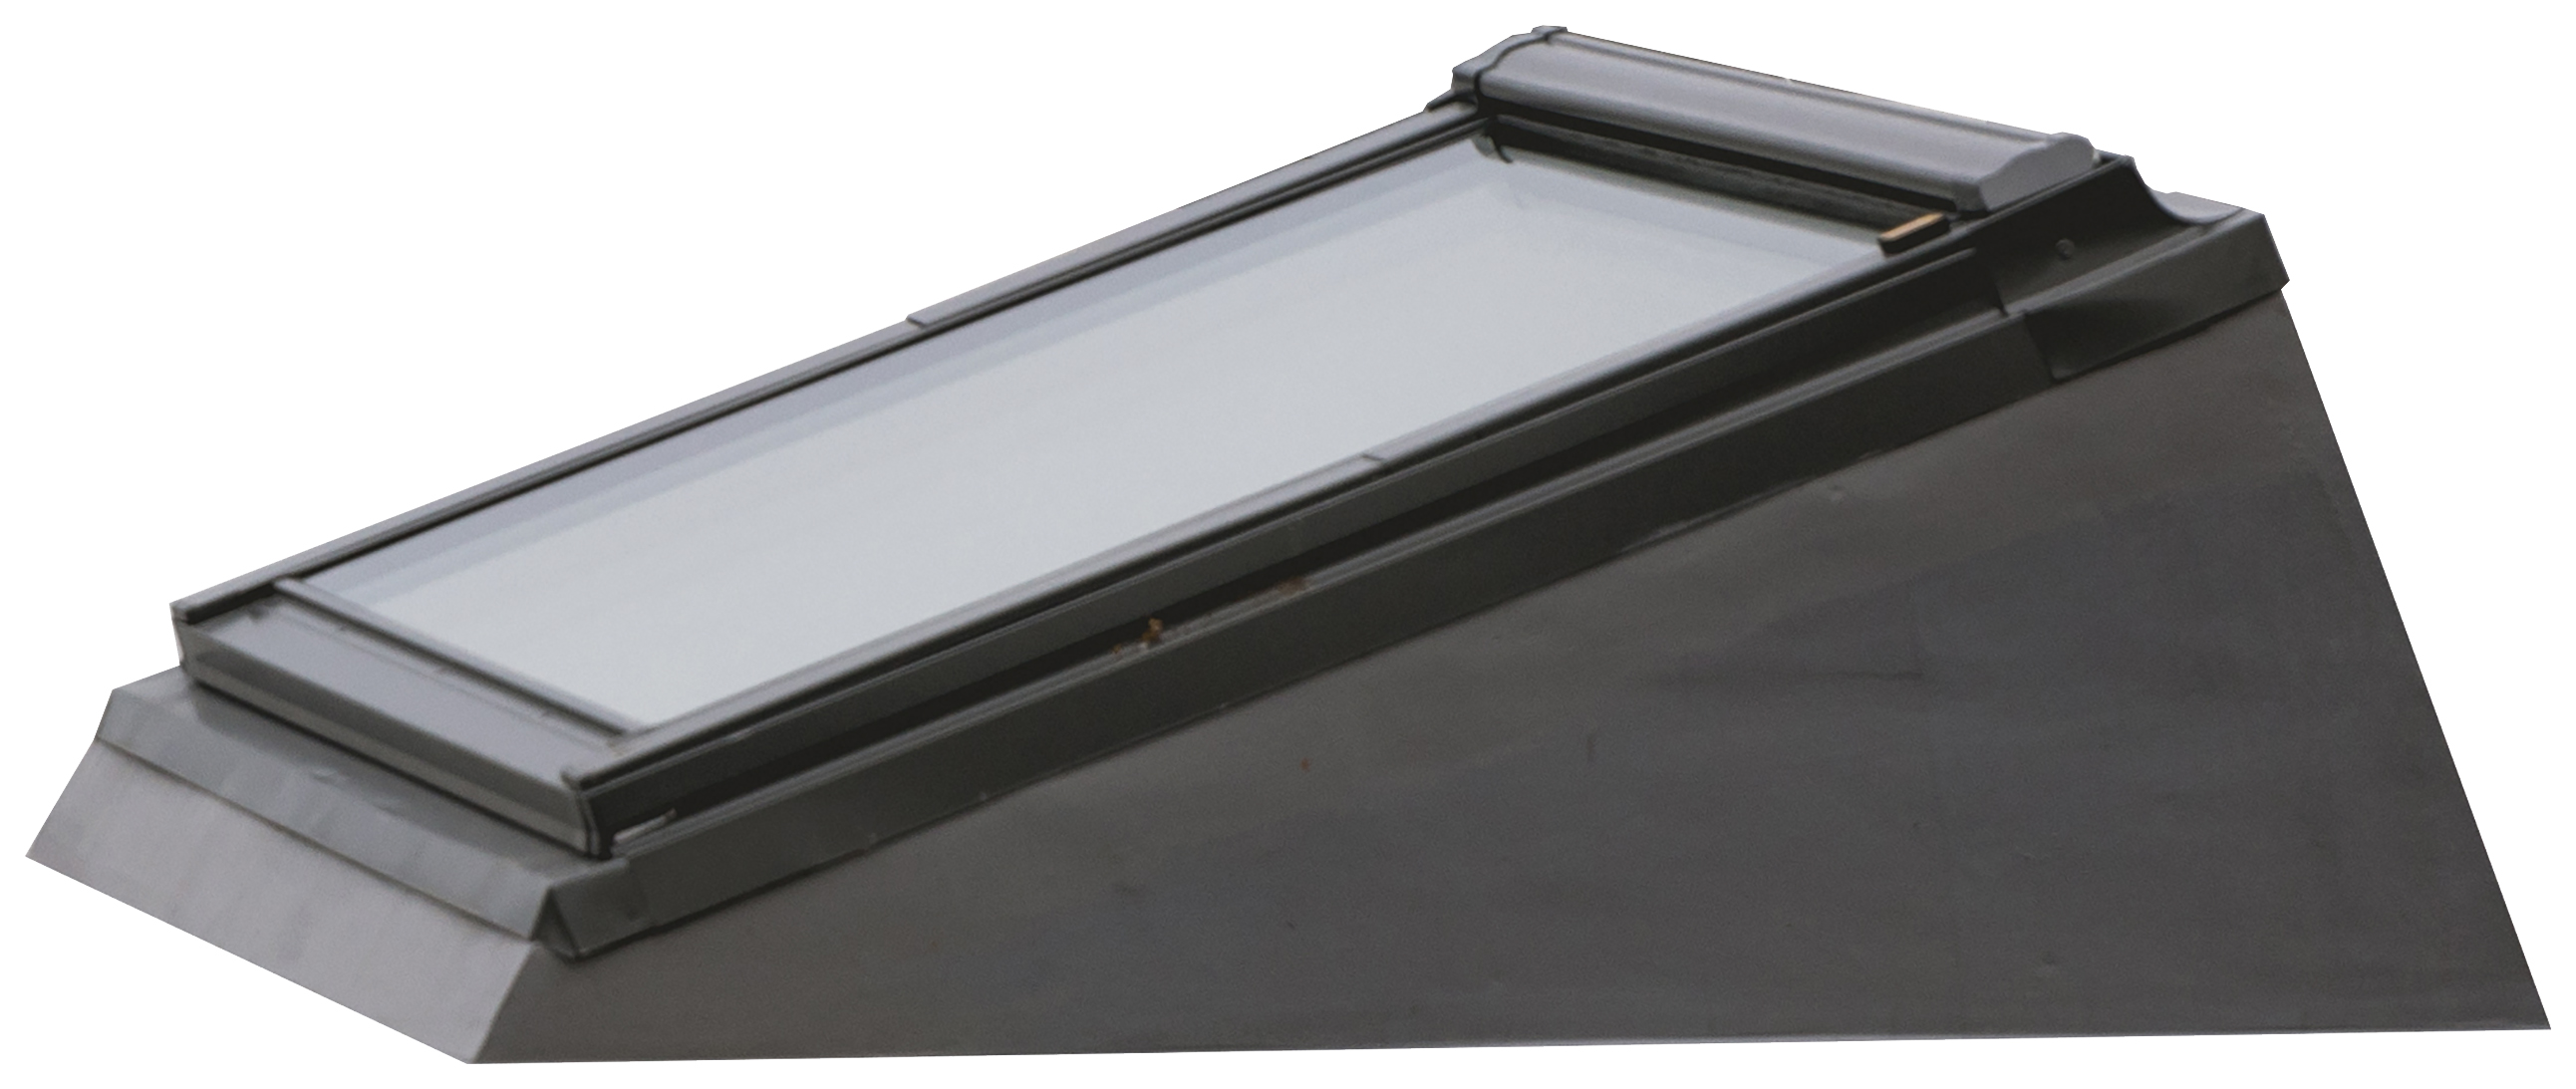 Image of Keylite FRS 01 Flat Roof System - 550 X 780mm